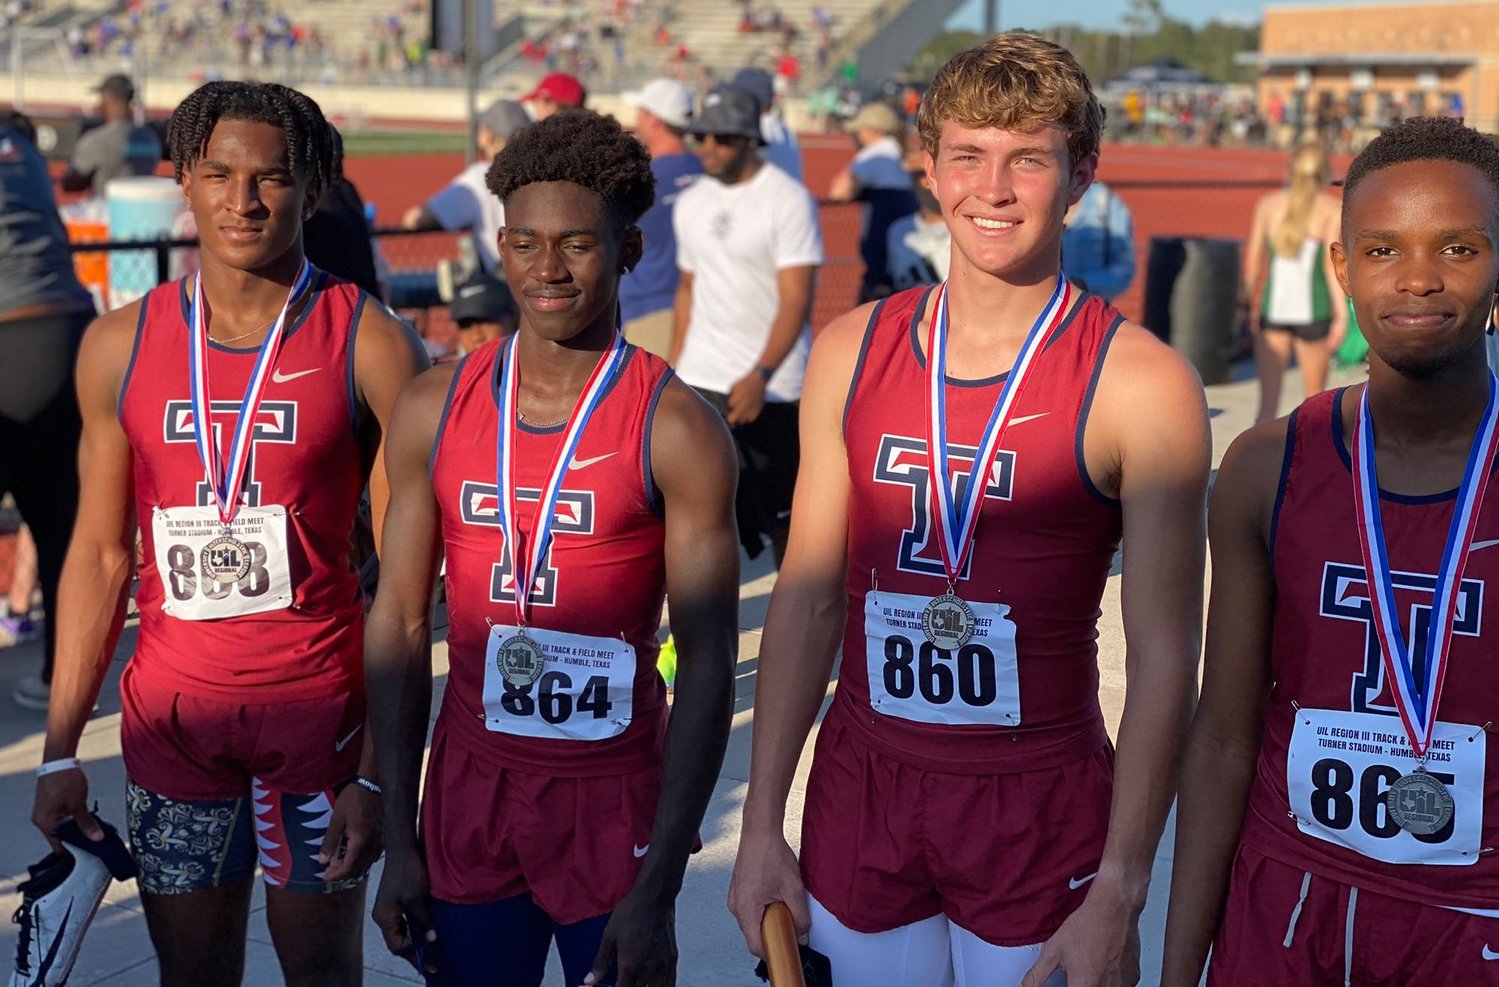 The Tompkins’ 4x100 relay team is pictured after placing second at the Region III-6A track and field meet April 24 in Humble with a time of 40.71 to Alief Taylor’s 40.70. From left to right is senior Marquis Shoulders, junior Joshua McMillan II, junior Blake Harris and senior Mark Ngei.